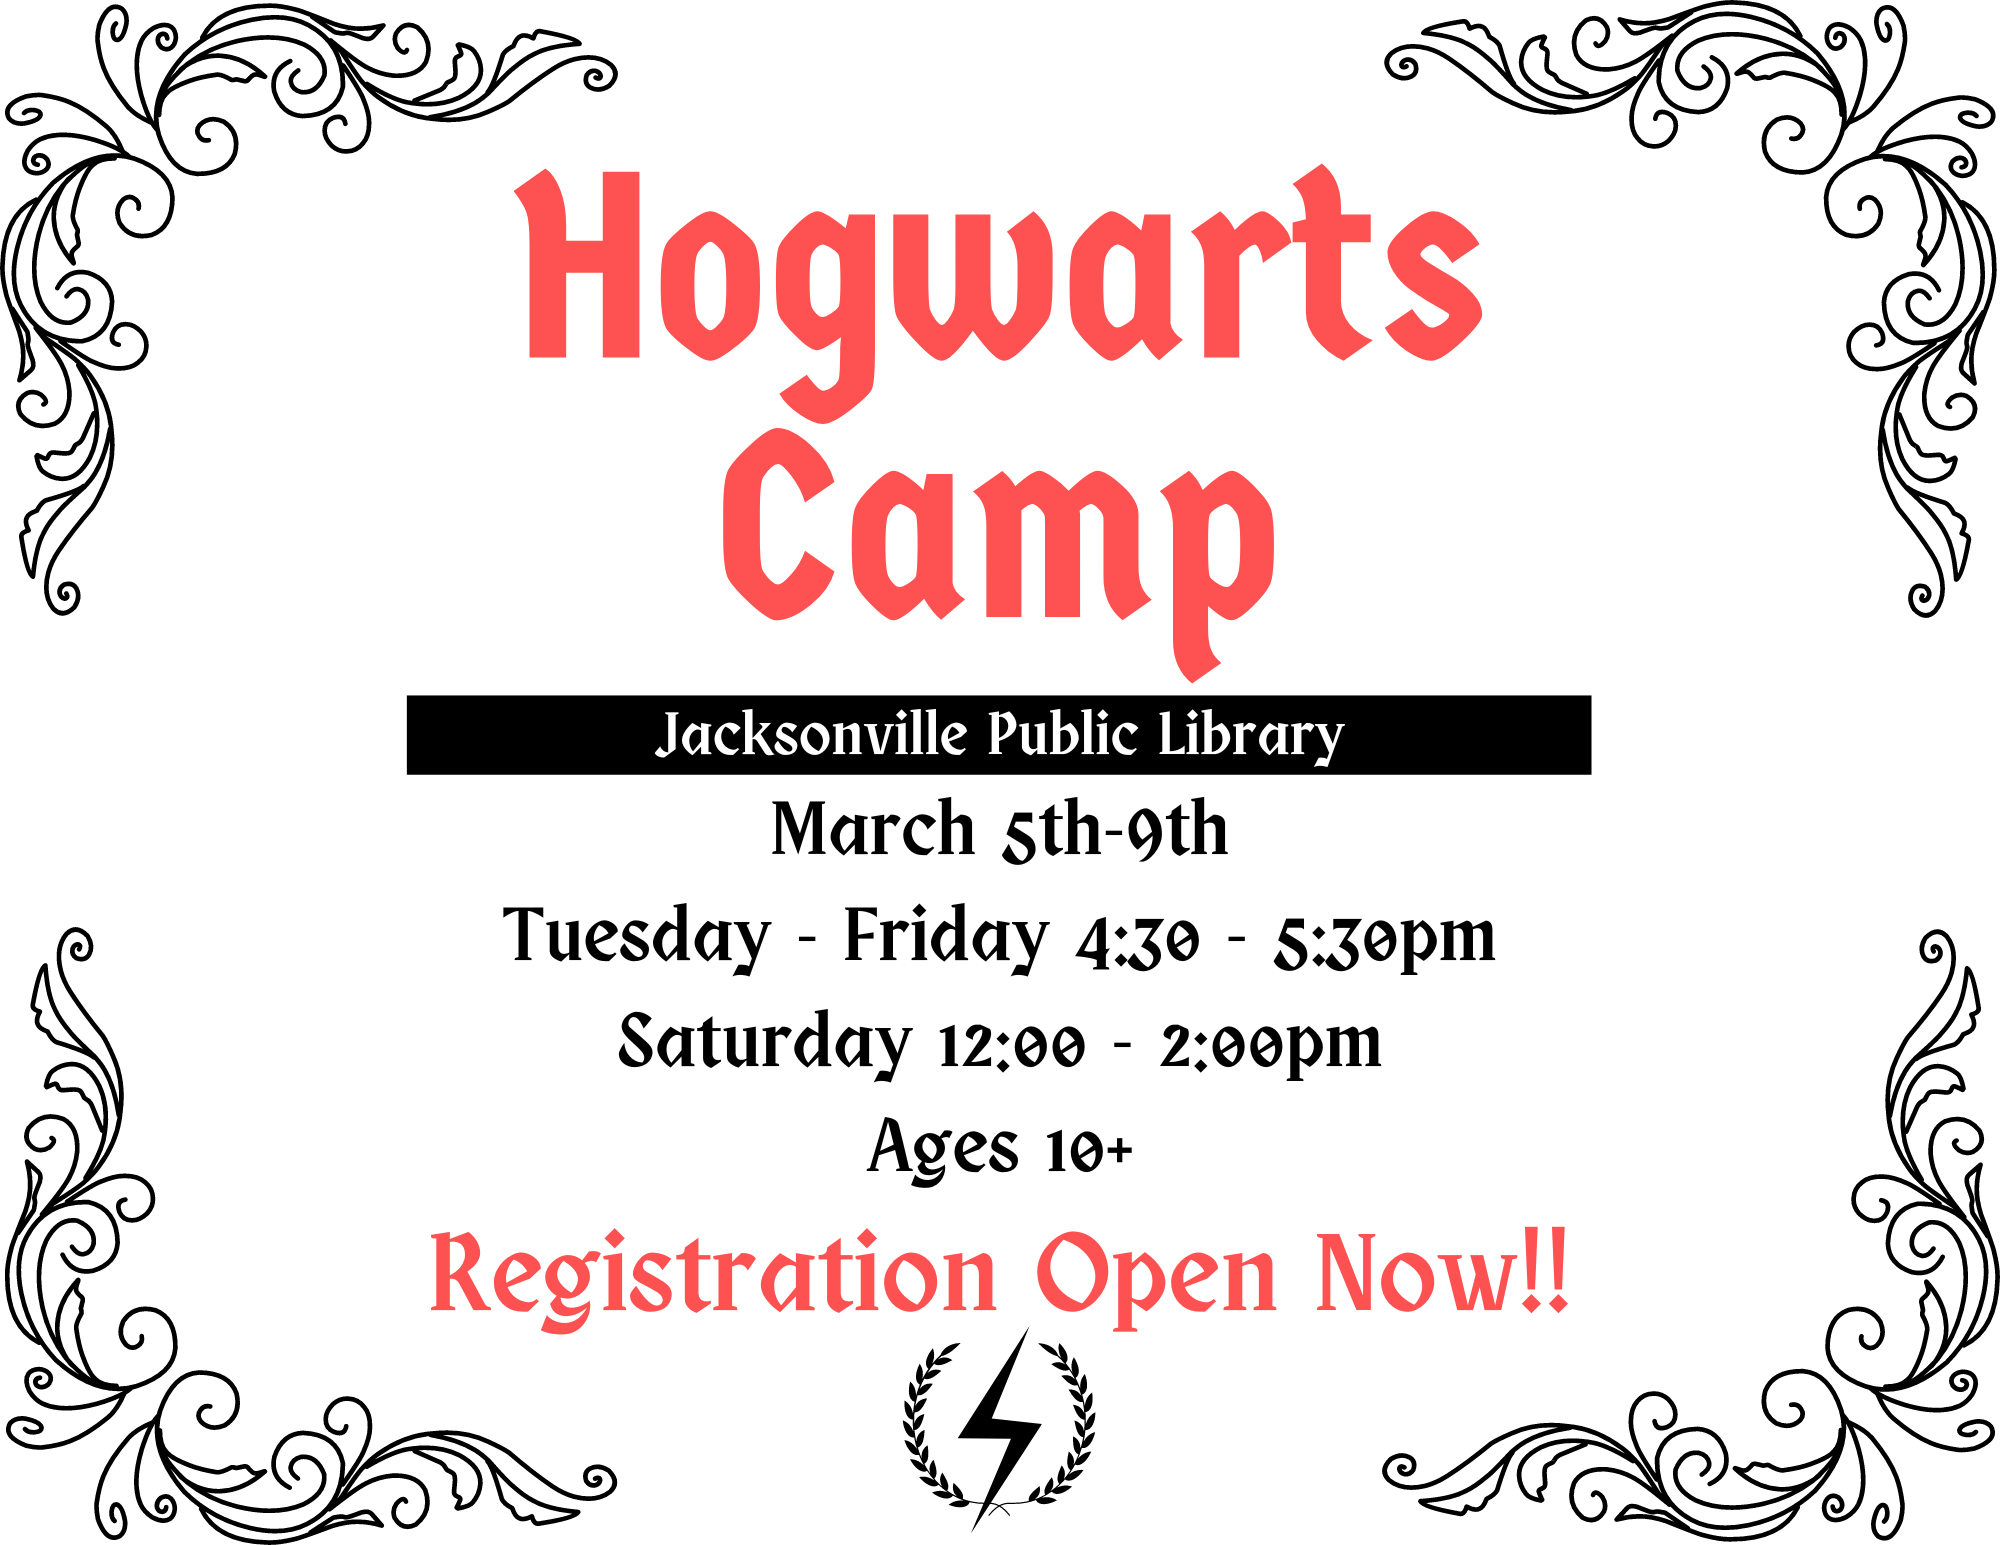 March 5th-9th, the Jacksonville Public Library will once again be embracing the Magical World and opening their doors to host a week full of magical fun!